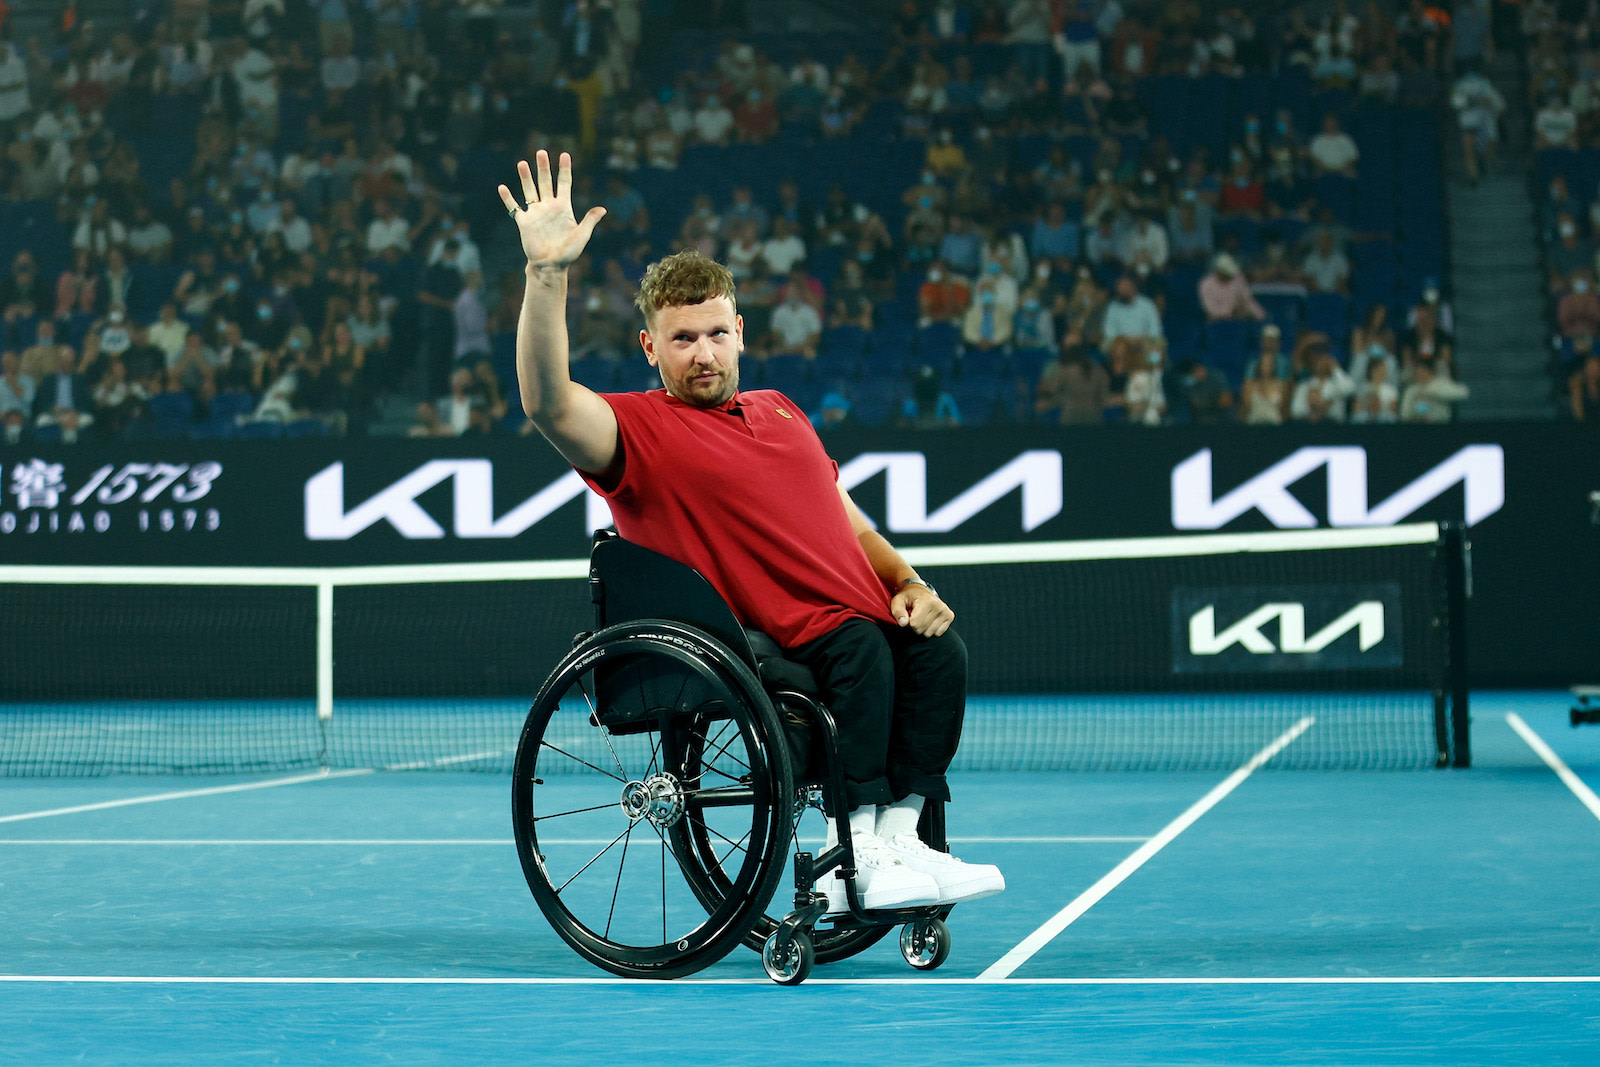 Dylan Alcott overwhelmed with emotions after receiving